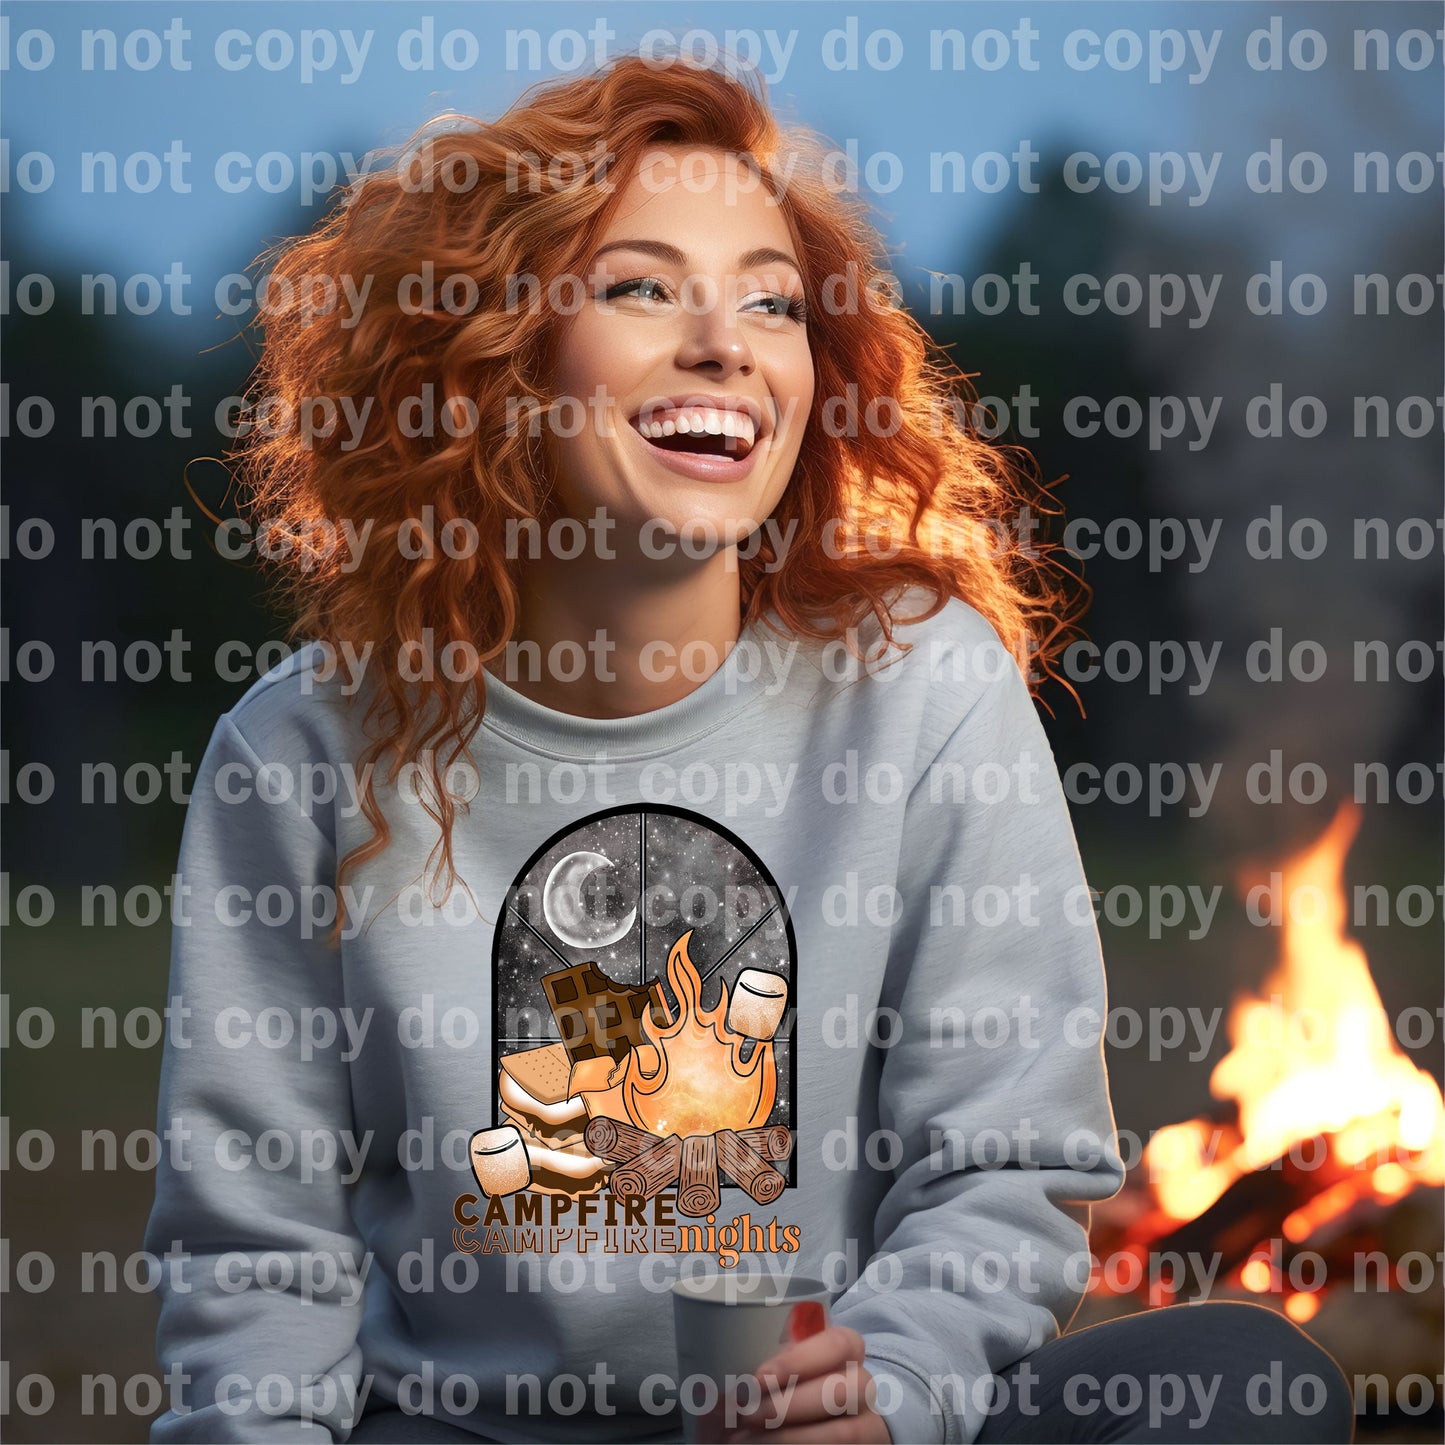 Campfire Nights with Optional Two Rows Sleeve Designs Dream Print or Sublimation Print